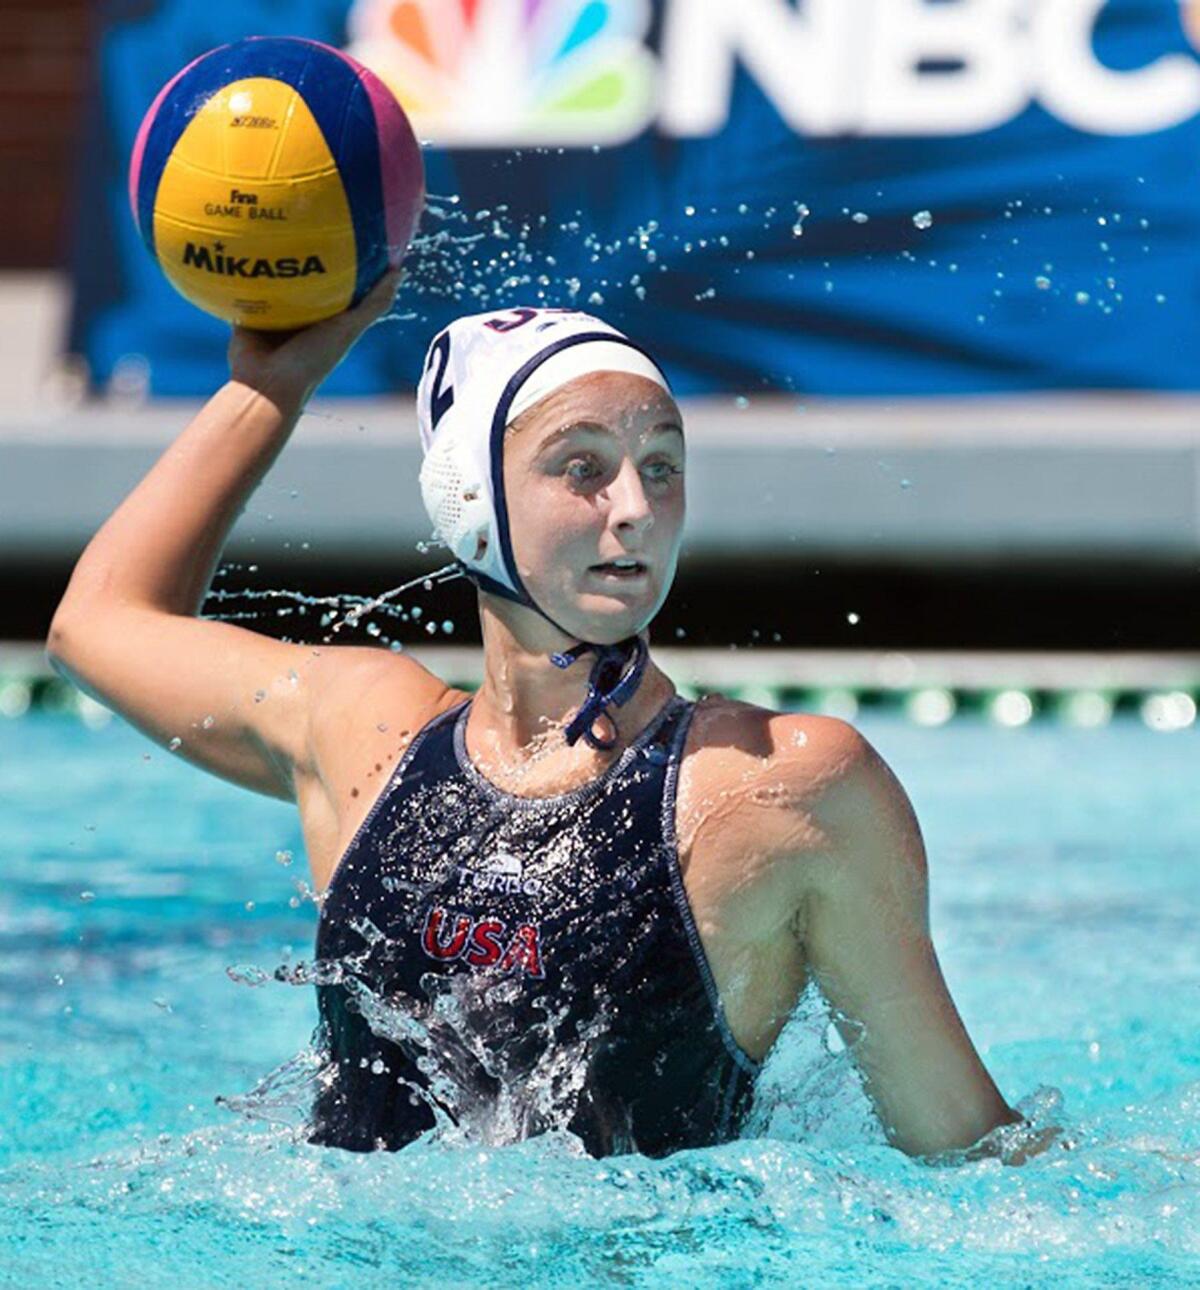 Maddie Musselman, a former Coroan del Mar High standout, made the tough decision to train with the U.S. senior women’s national team after her junior year and it’s paying off as she is a key contributor for Team USA, which is trying to defend its gold medal at the Rio Olympics.